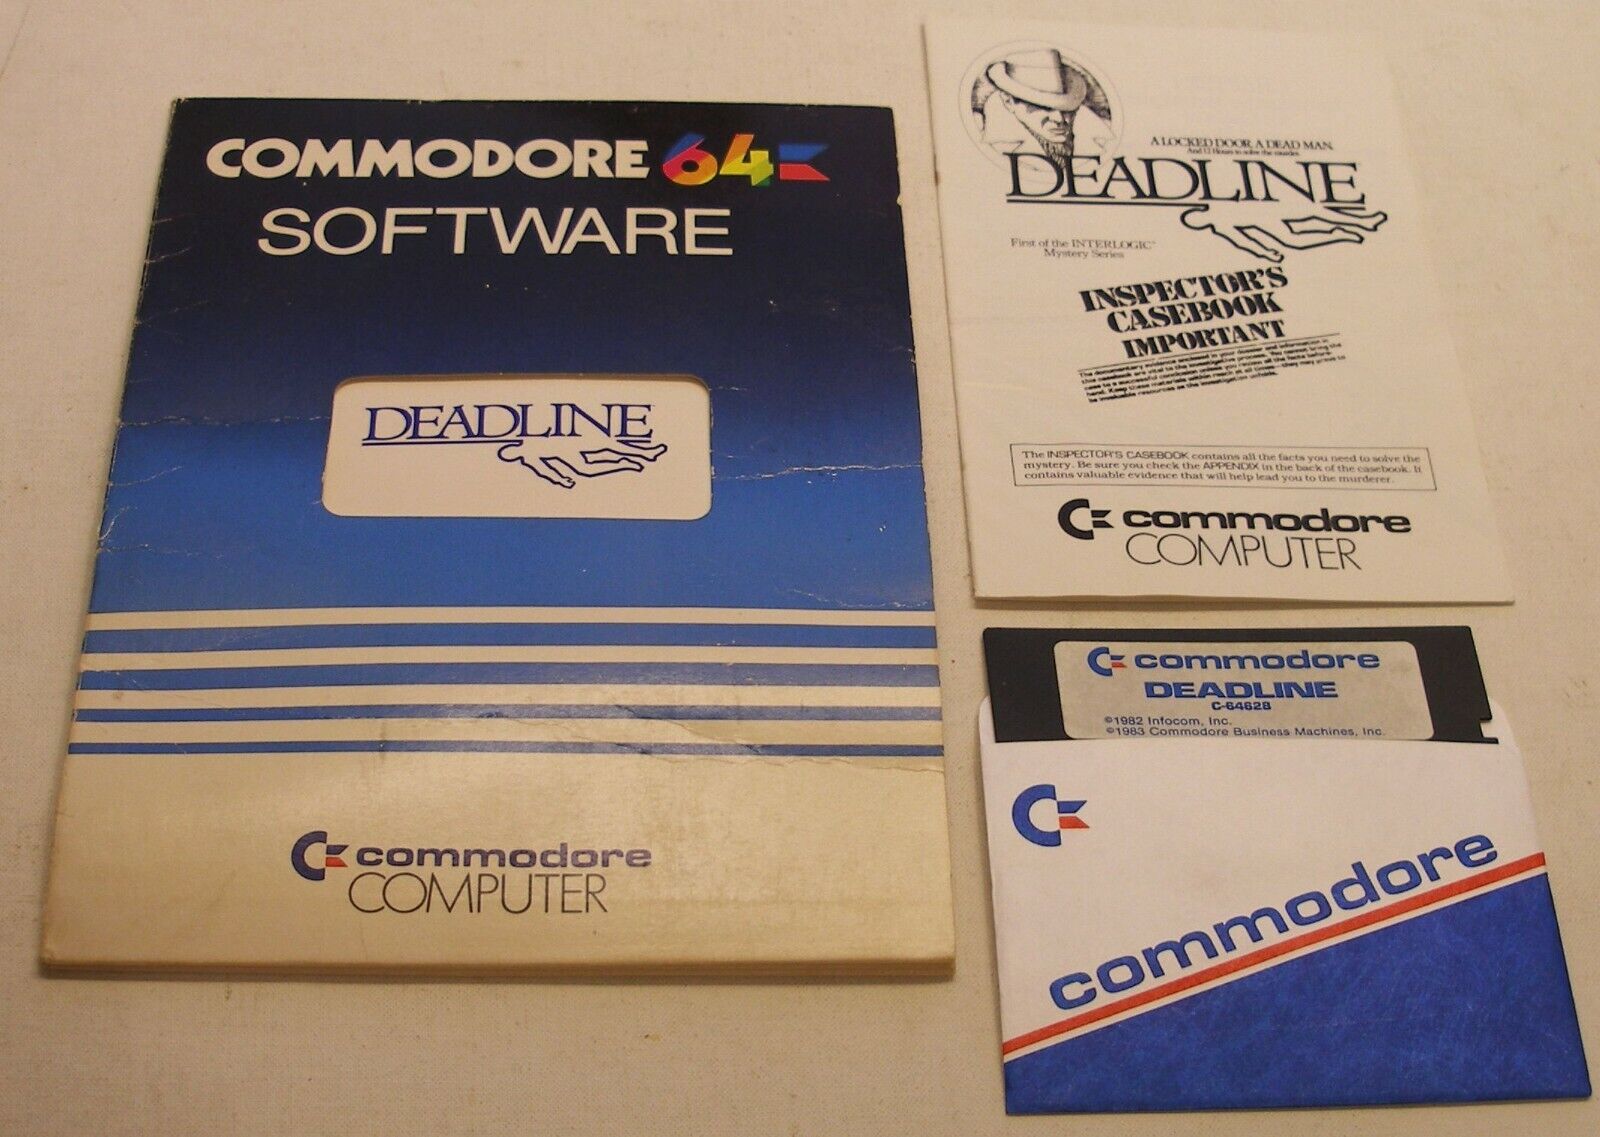 Deadline by Infocom for Commodore 64